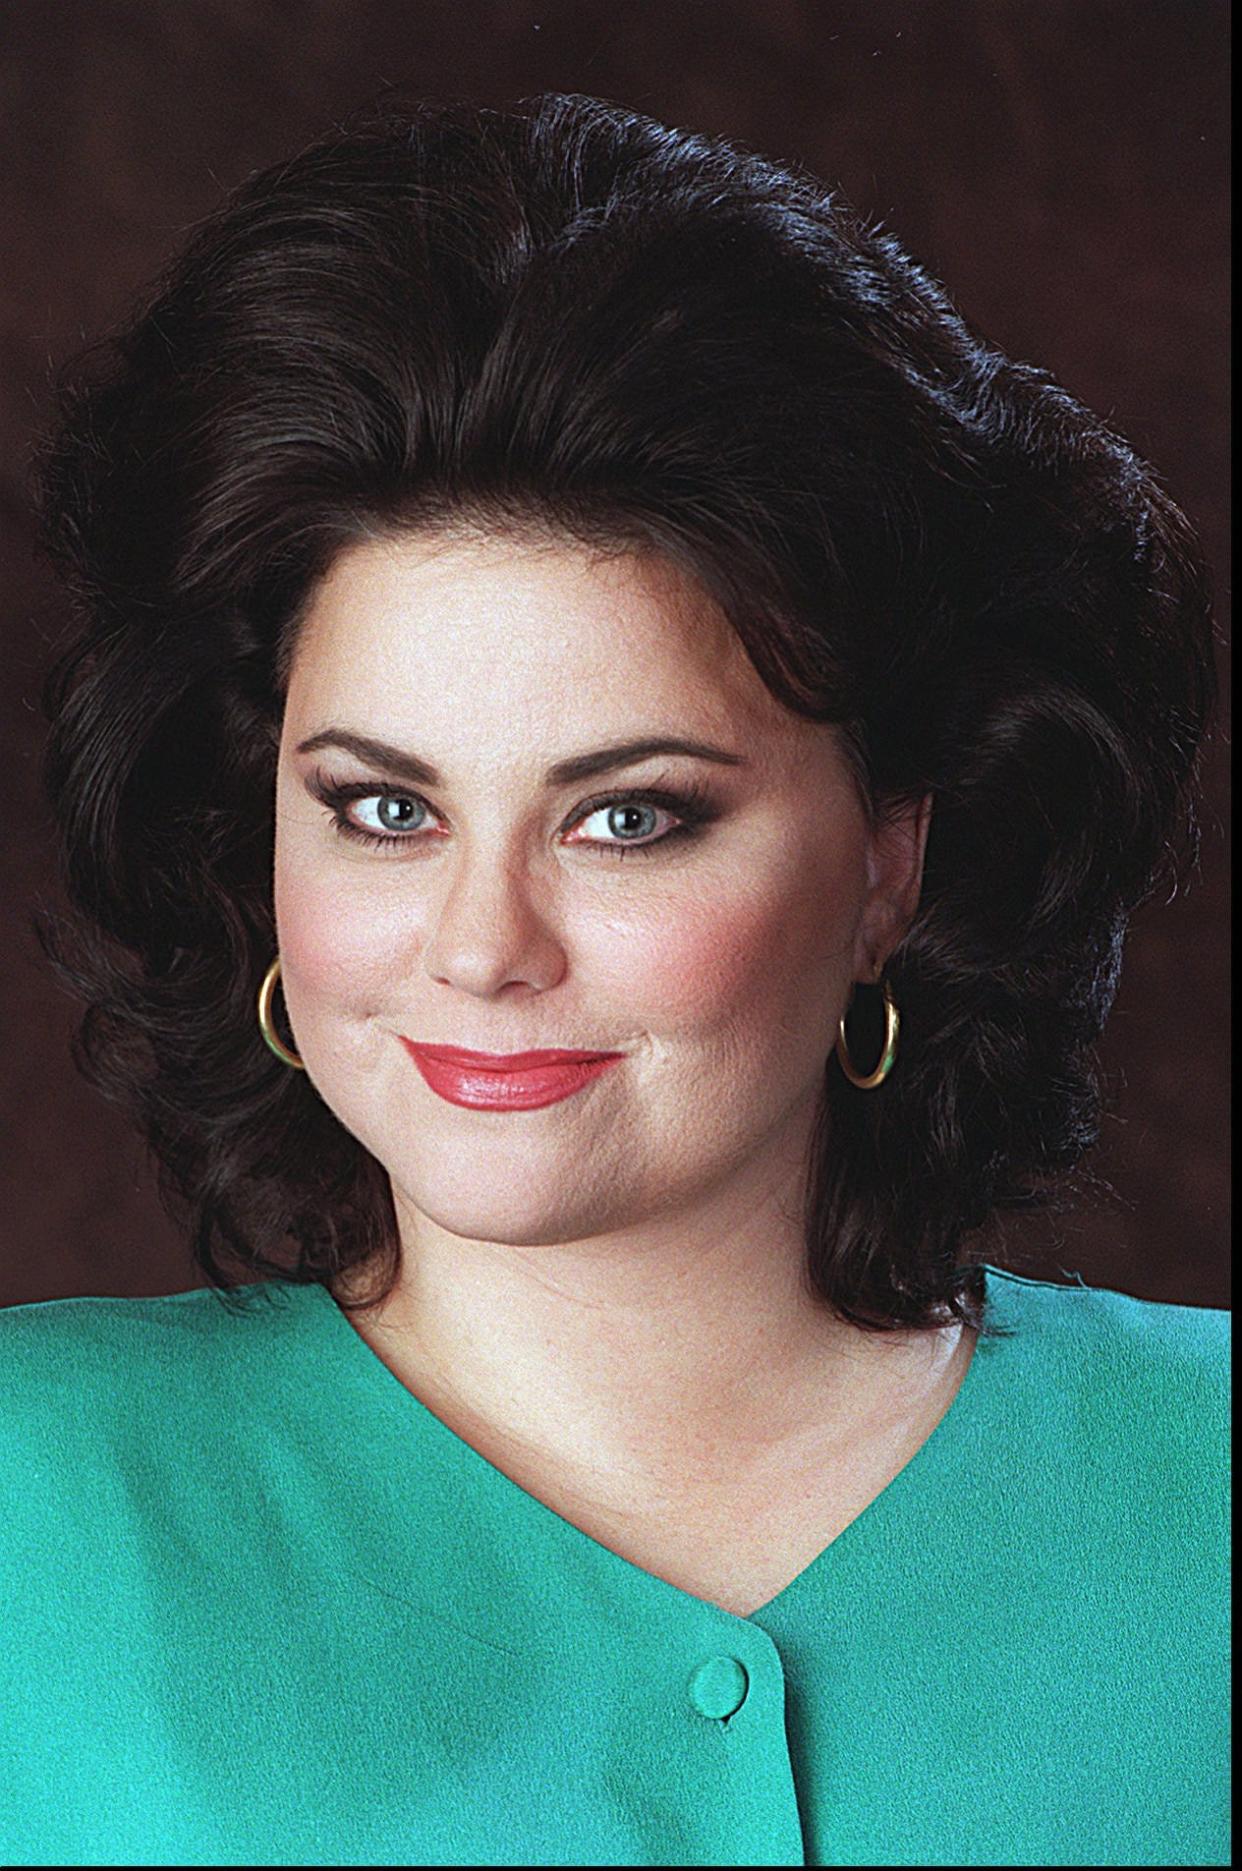 Delta Burke starred in "Designing Women" from 1986 to 1991.